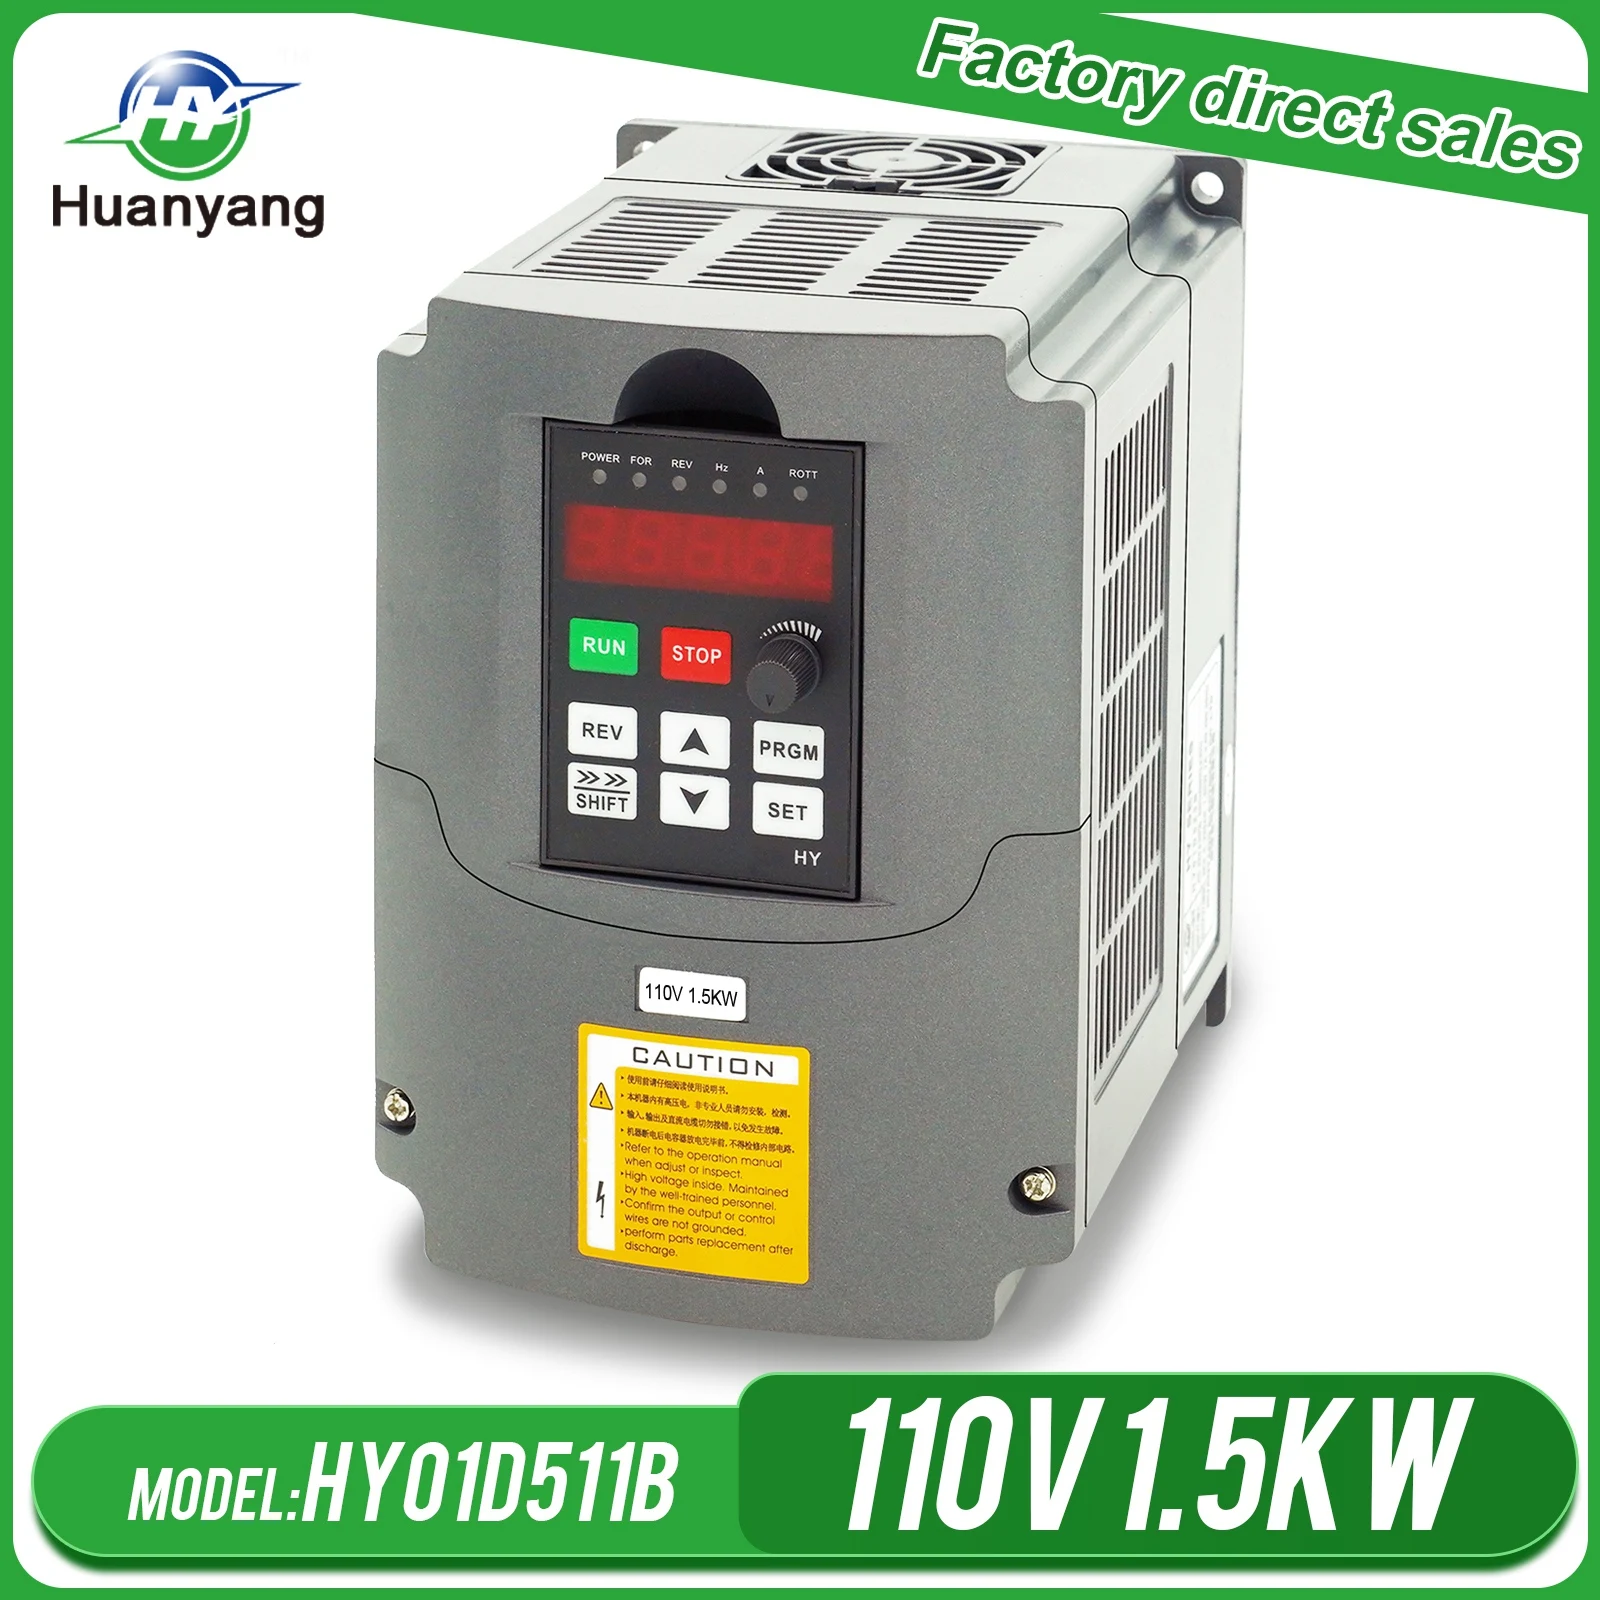 HUANYANG 1.5KW,3KW,2.2KW,4KW,5.5KW,7.5KW VARIABLE FREQUENCY DRIVE INVERTER VFD 